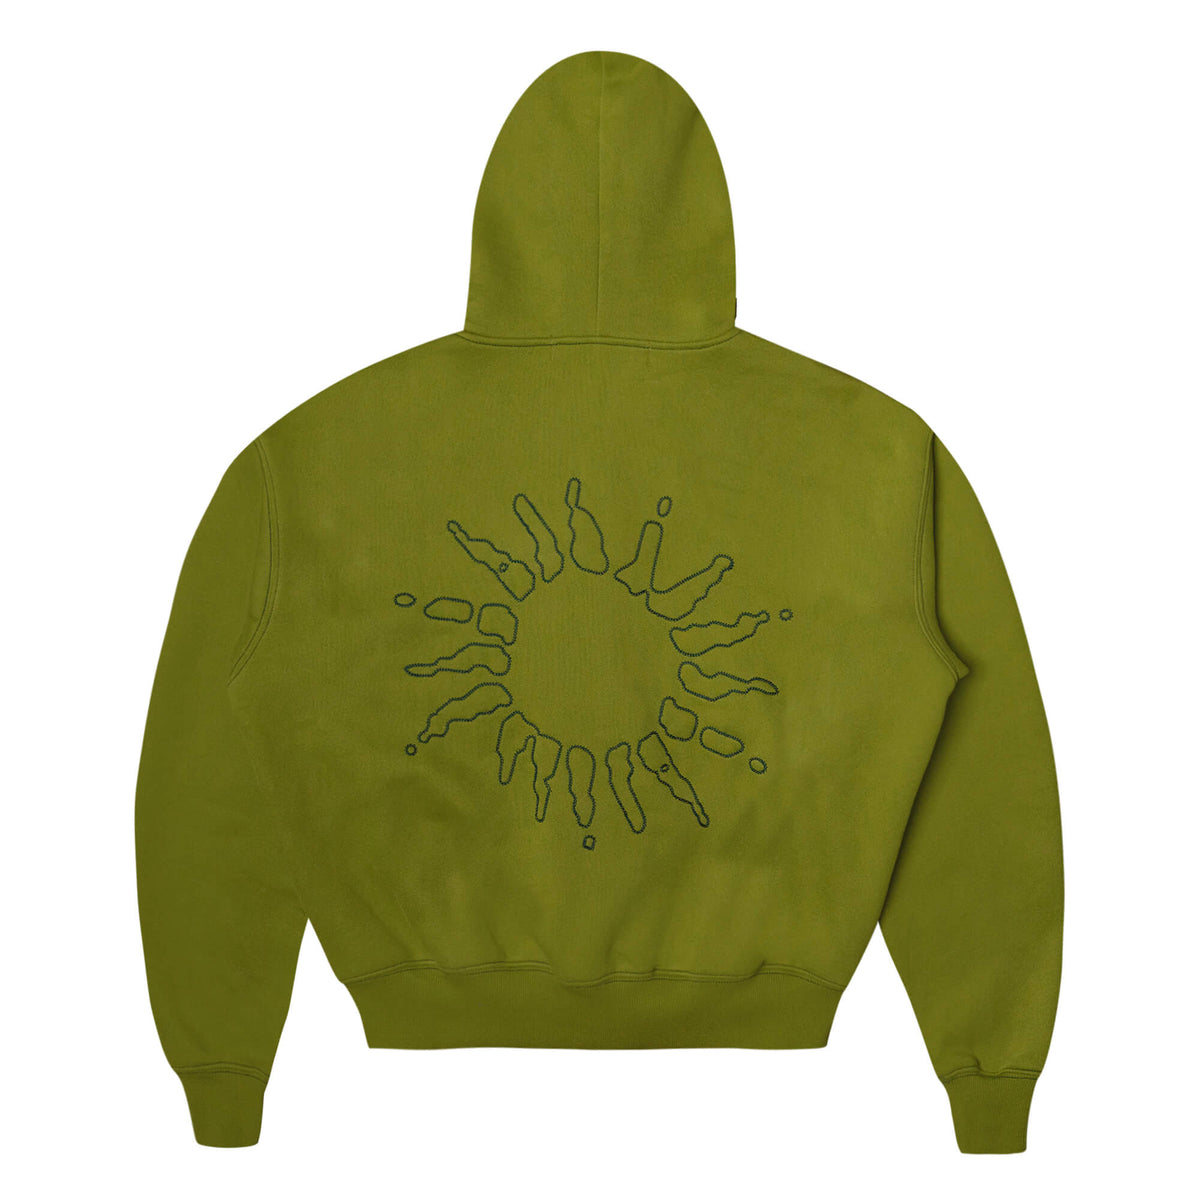 Rear view of the 4YE Signature Logo Zip Hoodie in Matcha Green. The hoodie features 325 GSM brushed medium weight fleece offering ultimate comfort and warmth, including high-quality chain stitch embroidery and a 2-way YKK zipper, showcasing a trendy cropped and boxy fit.